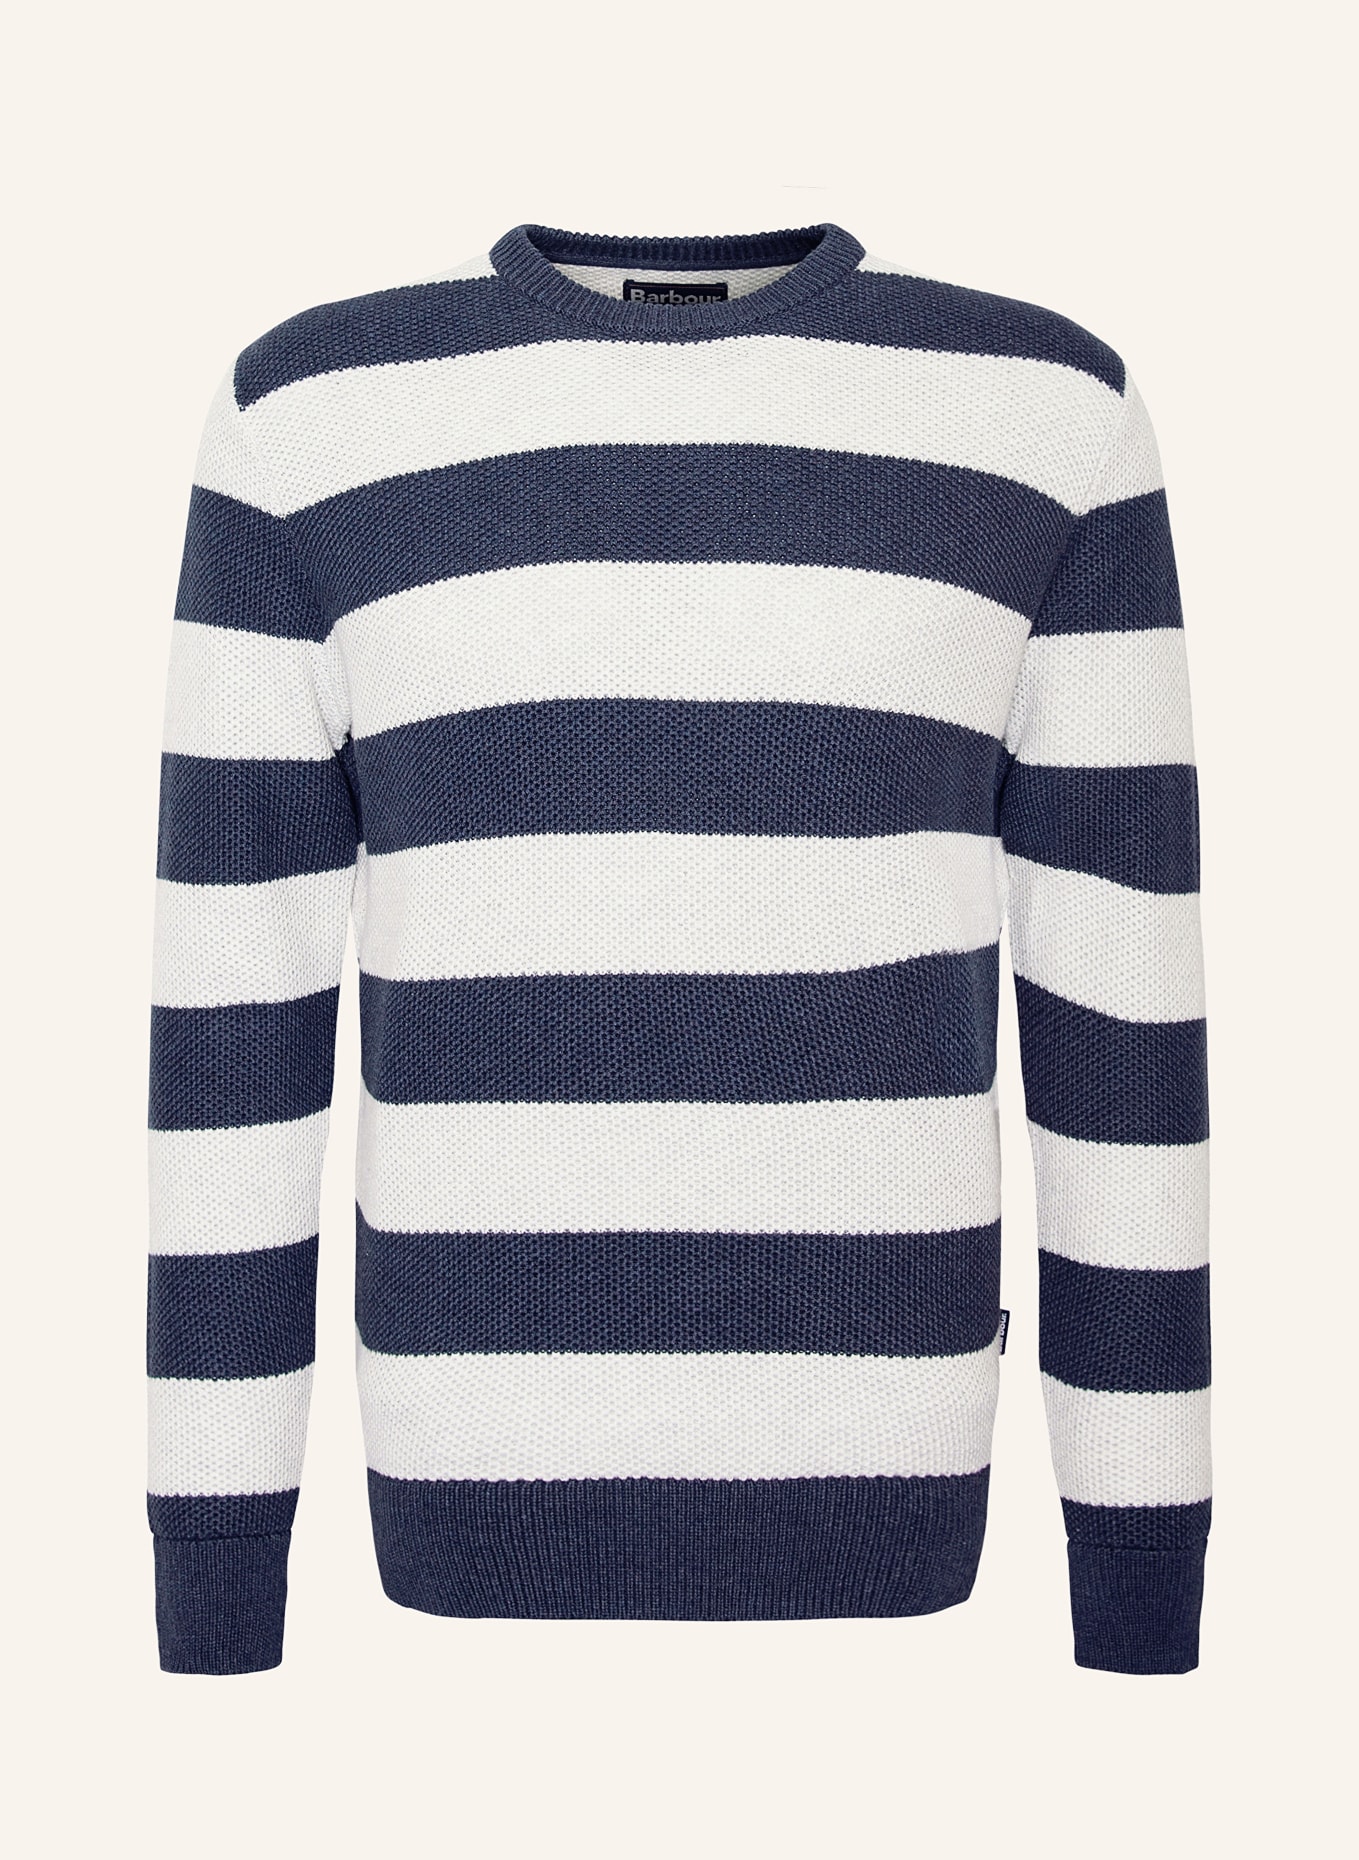 Barbour Sweater, Color: DARK BLUE/ WHITE (Image 1)